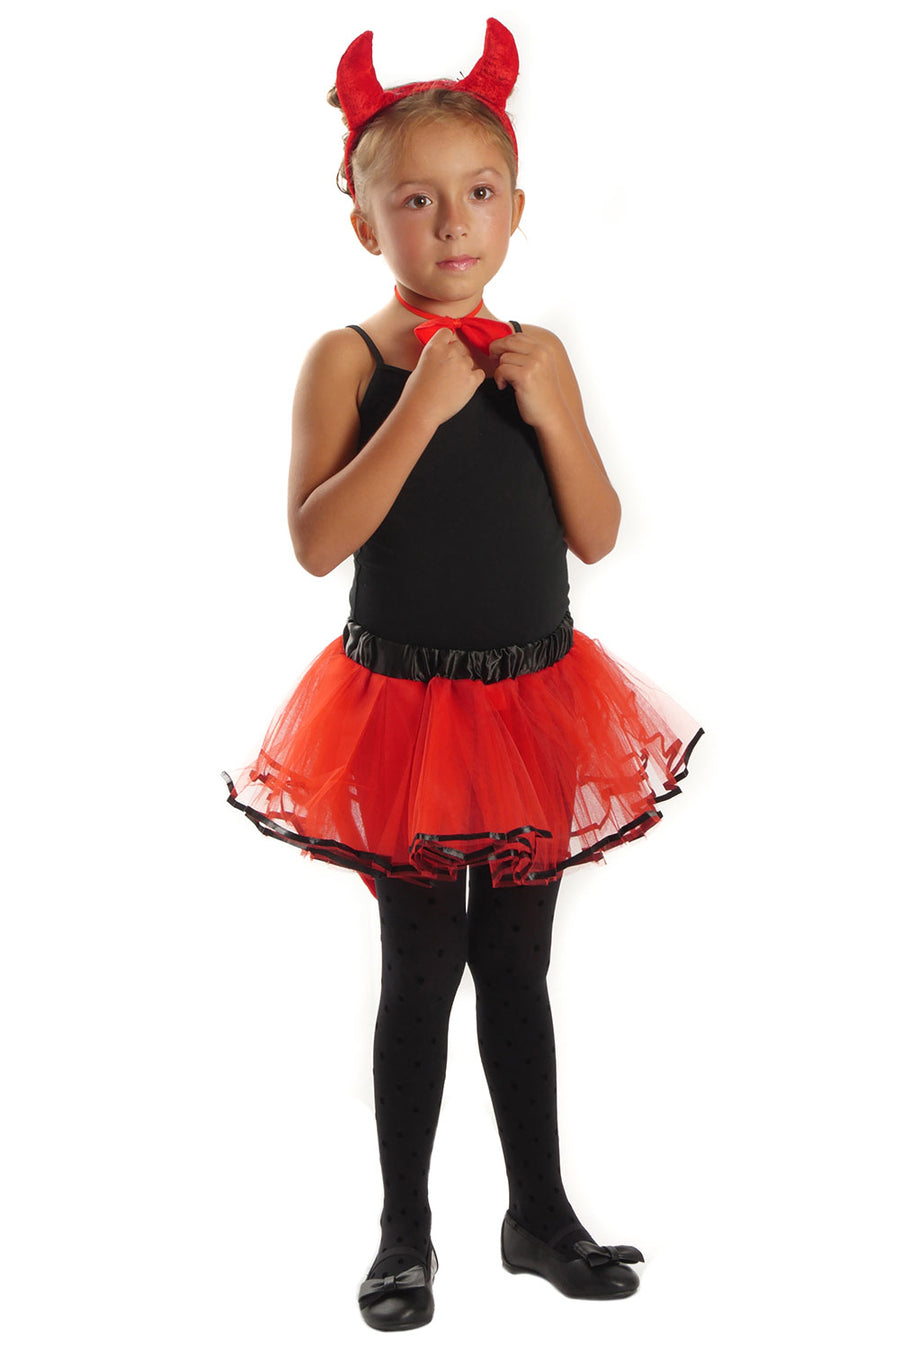 Halloween Red Devil Costume Set: Tutu, Horns, Bow, and Tail for 2-10 Years - Vacay Land 